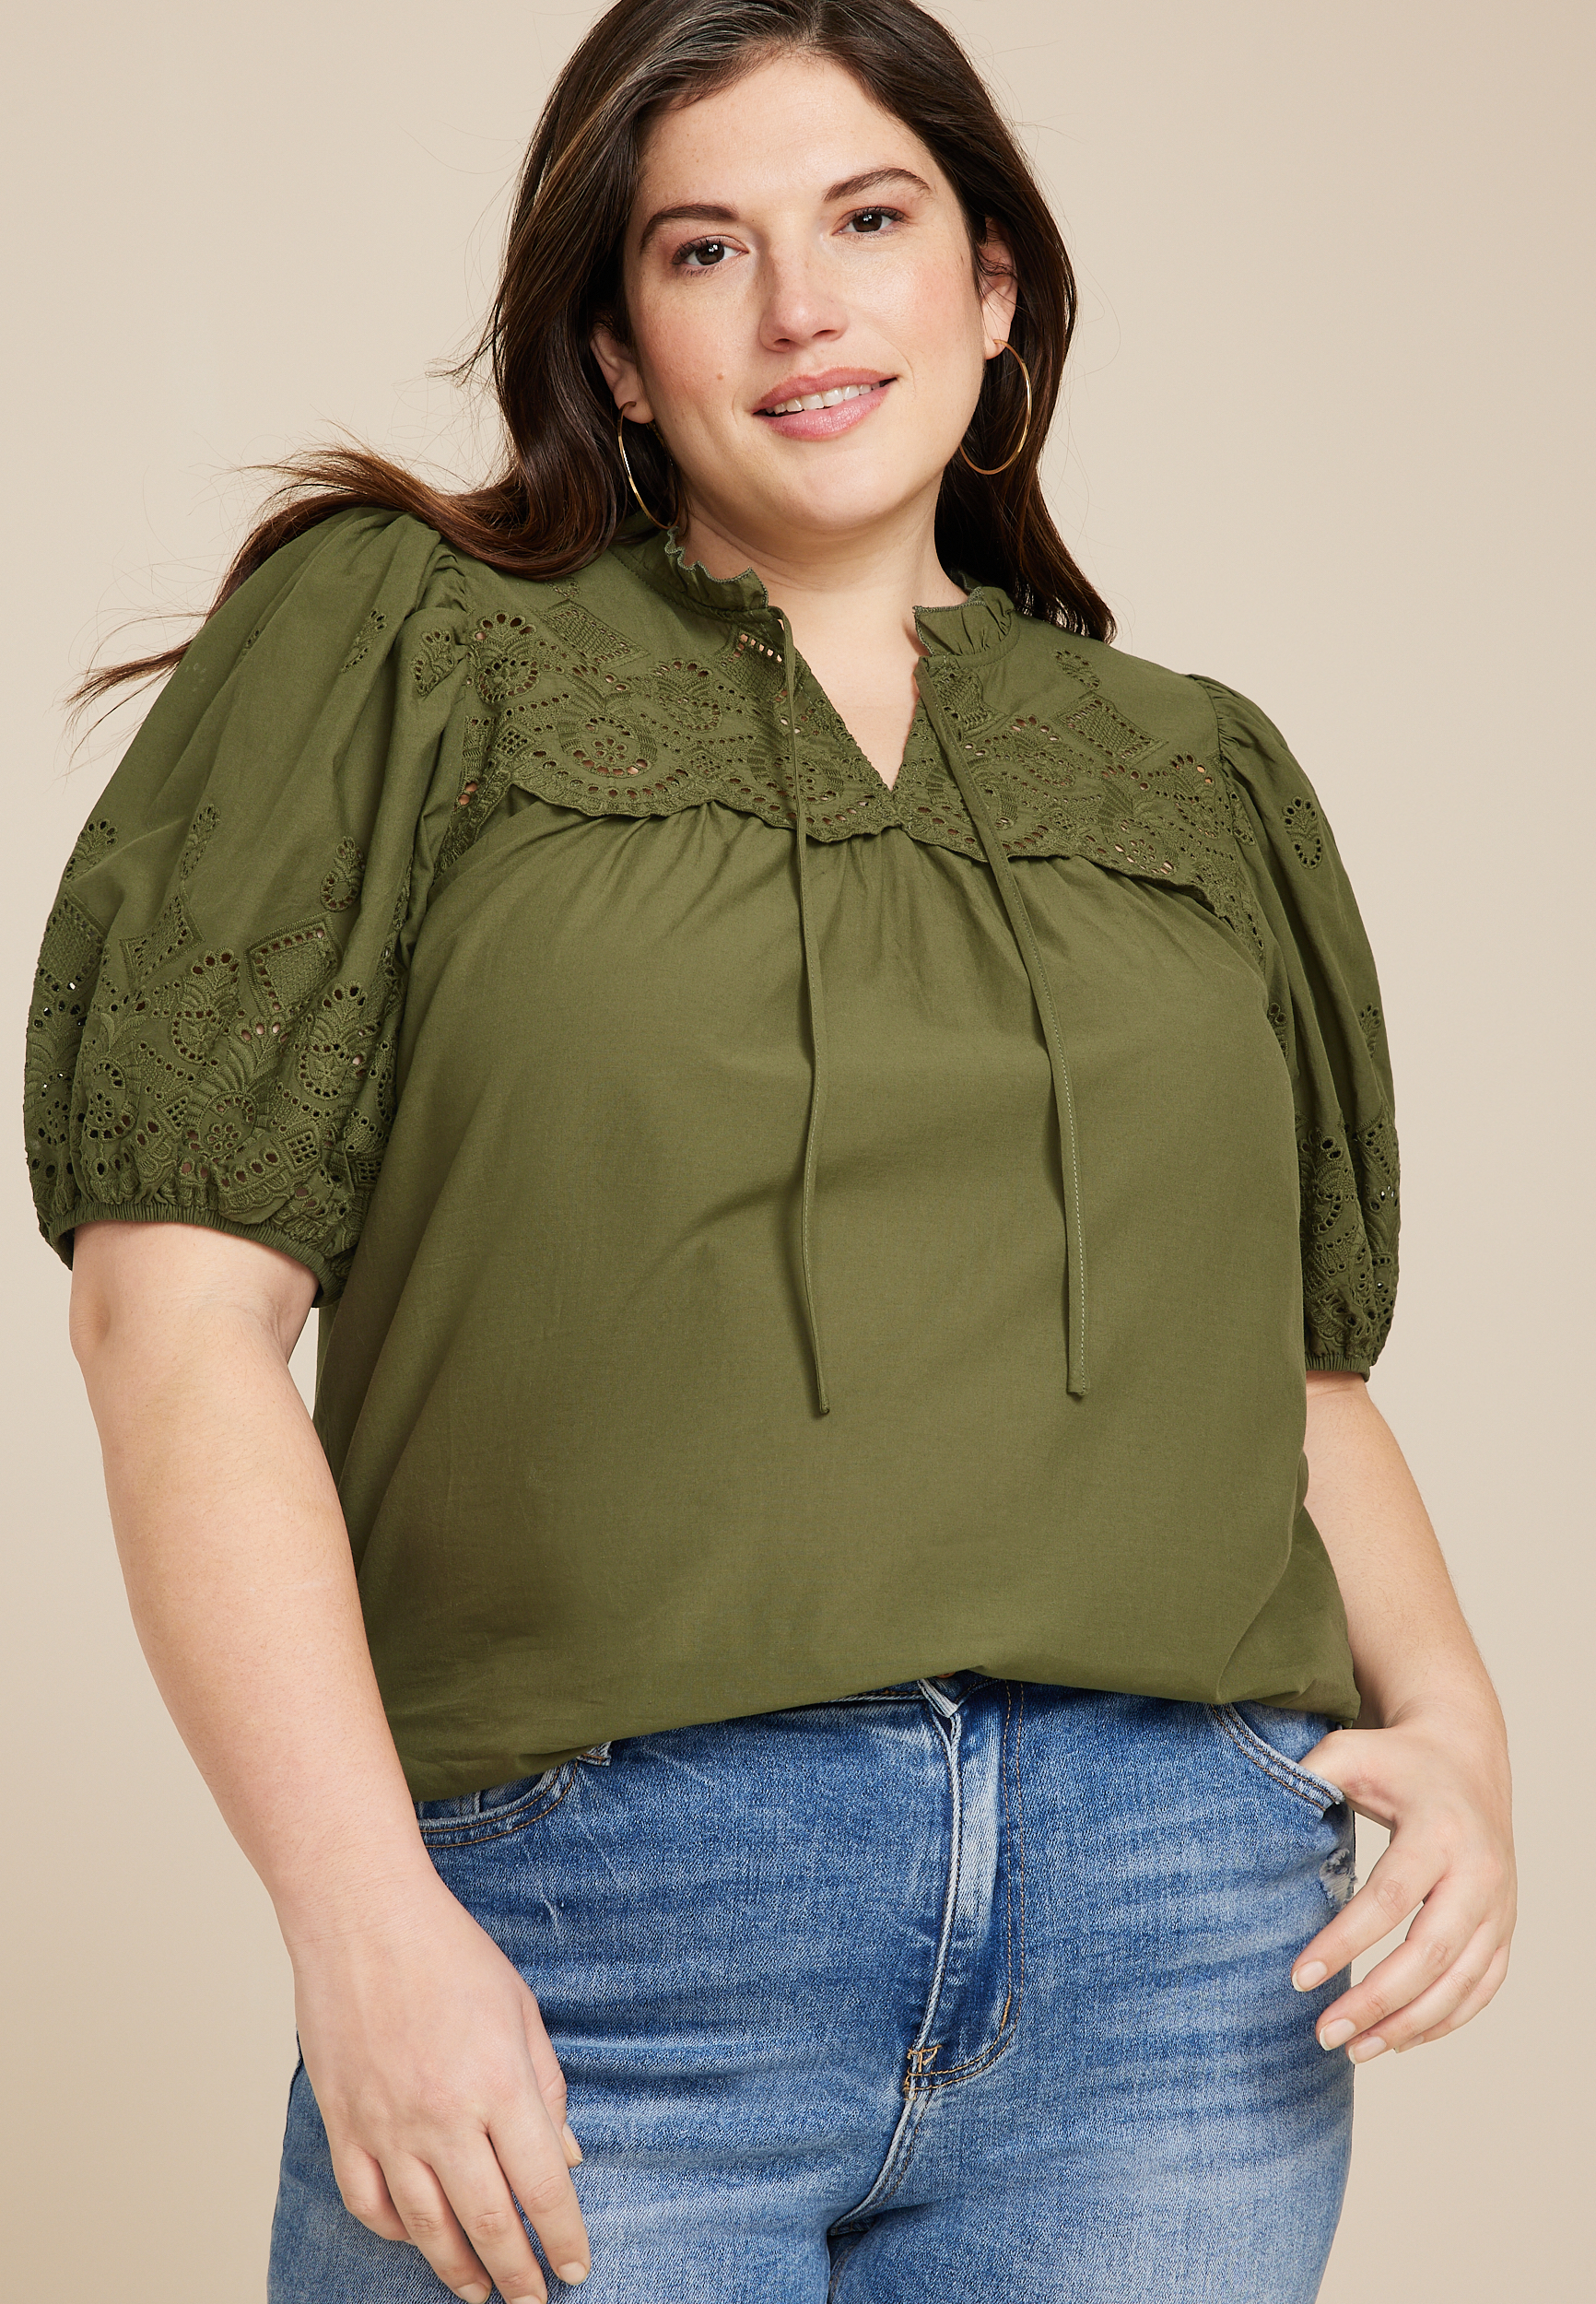 Plus Size Tops, New Trends Collection Online